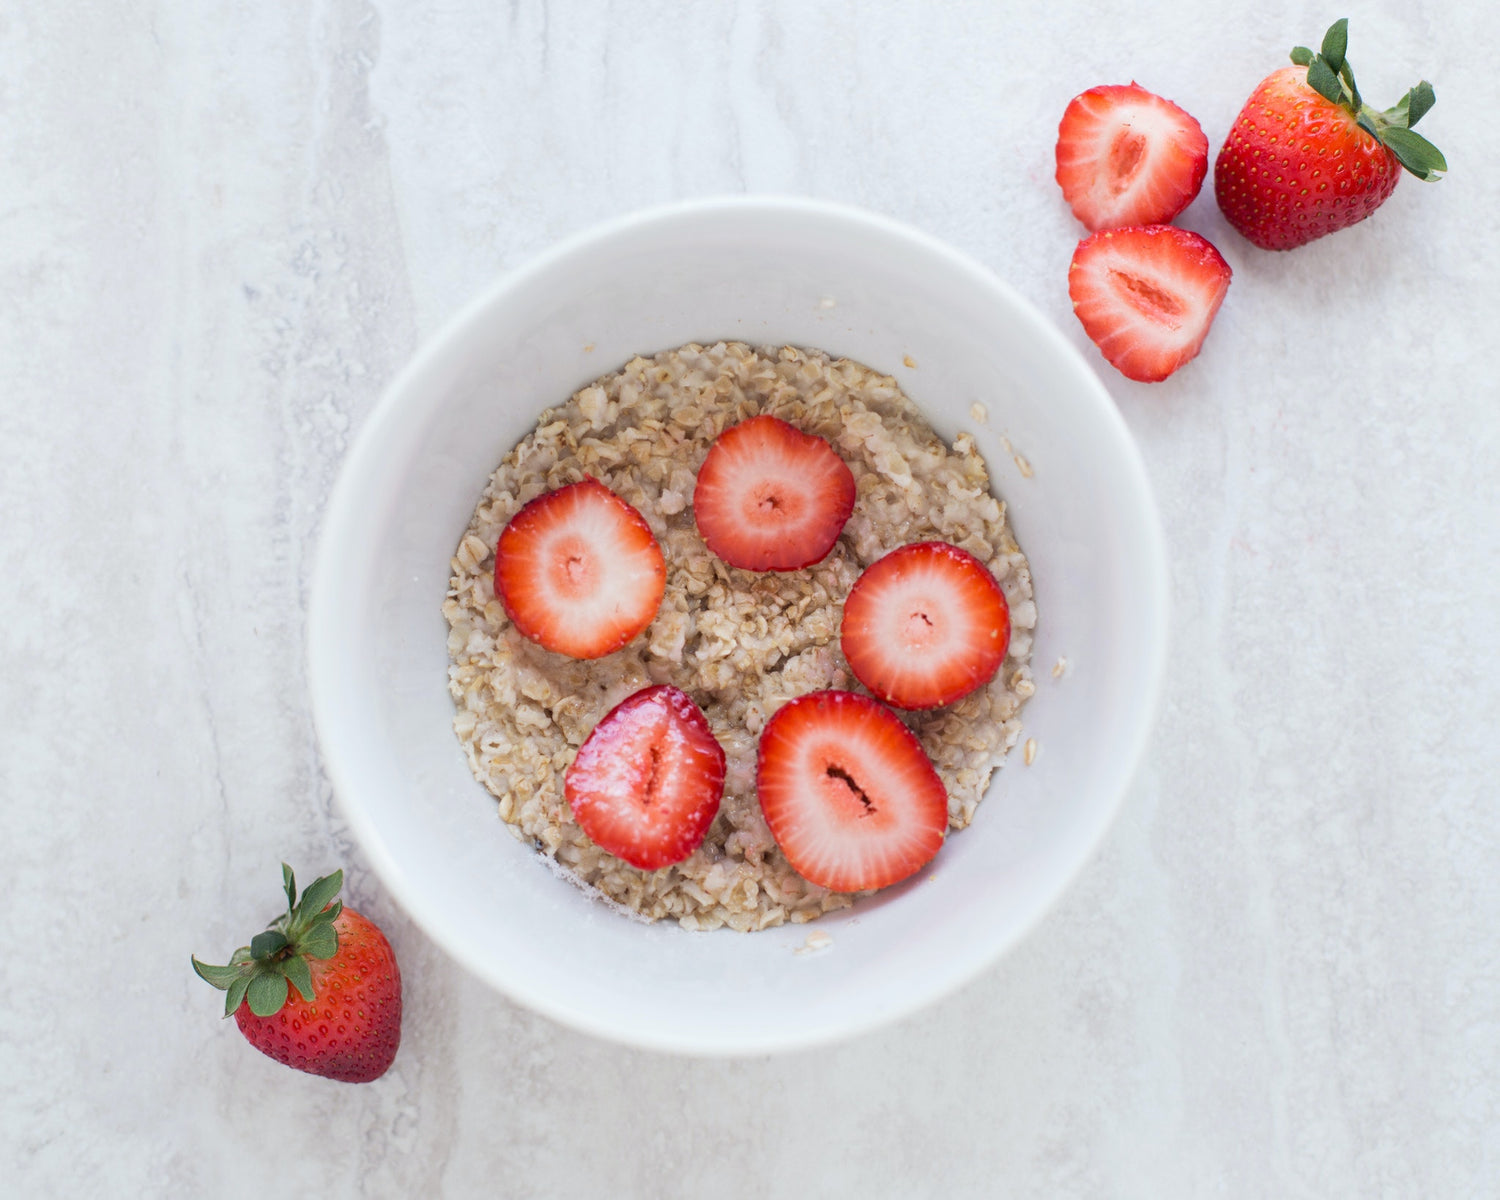 Oatmeal served with sliced strawberries on top for breakfast.